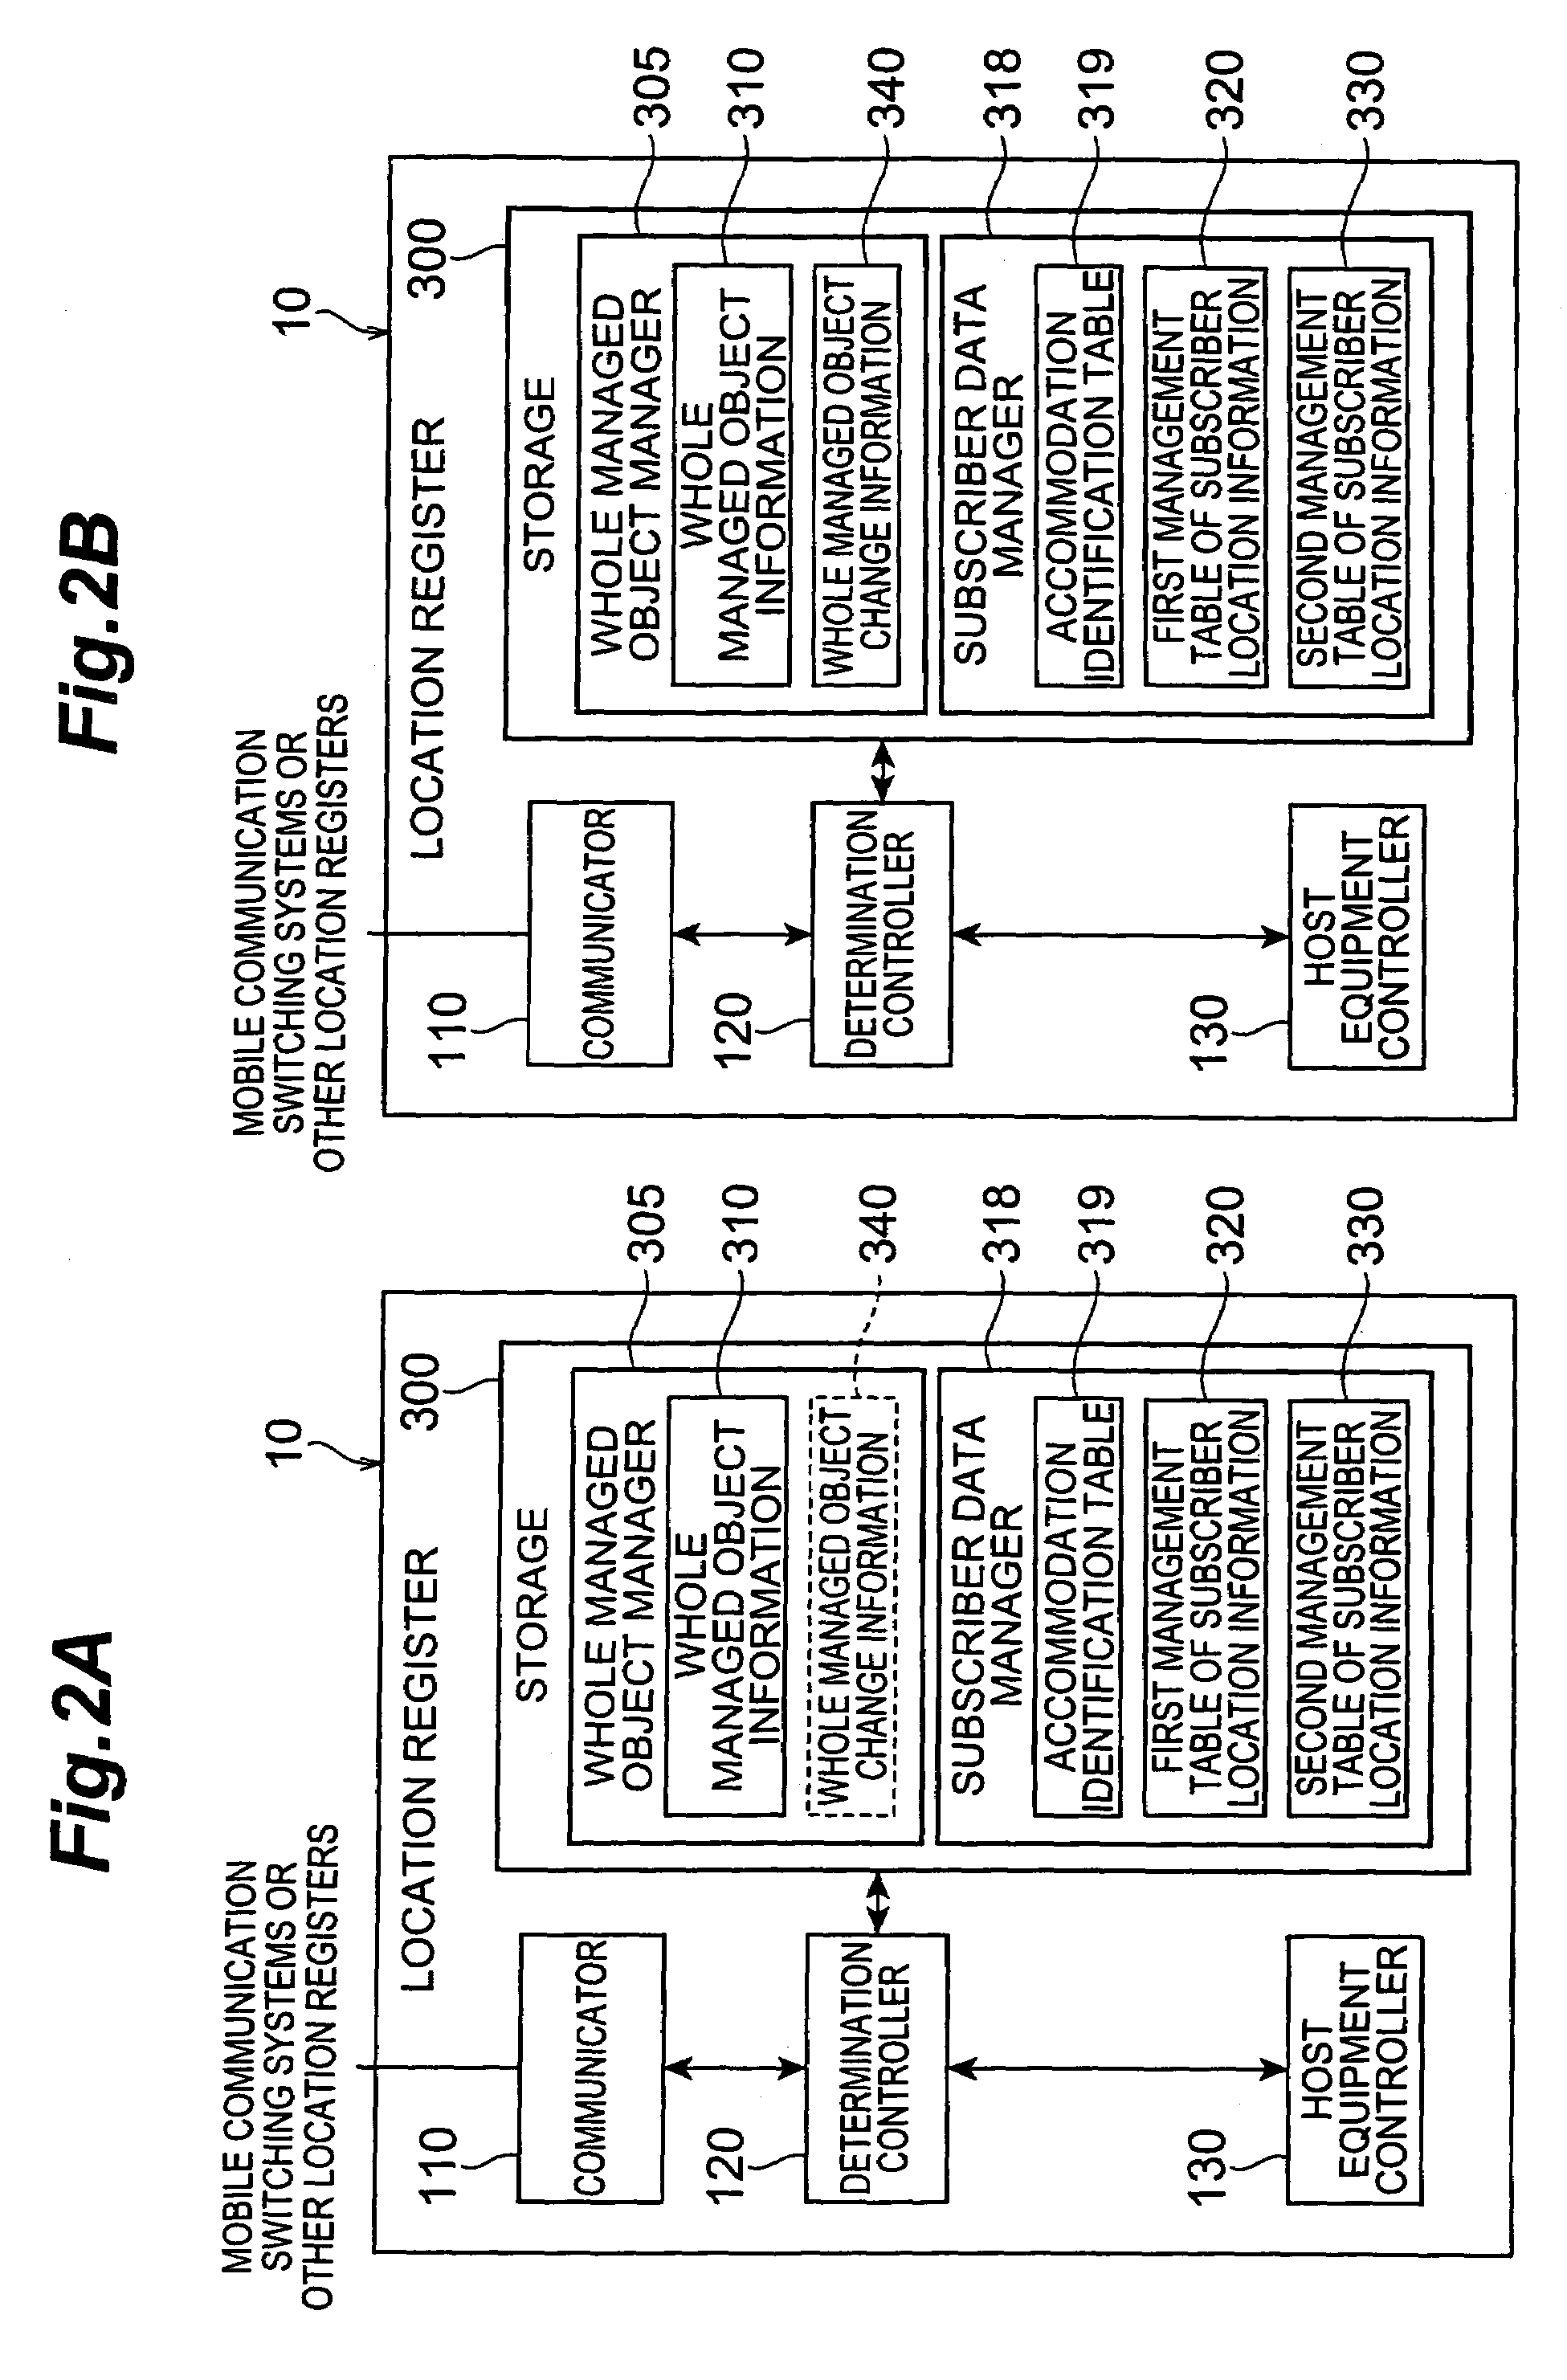 Location register and accommodation transfer control method